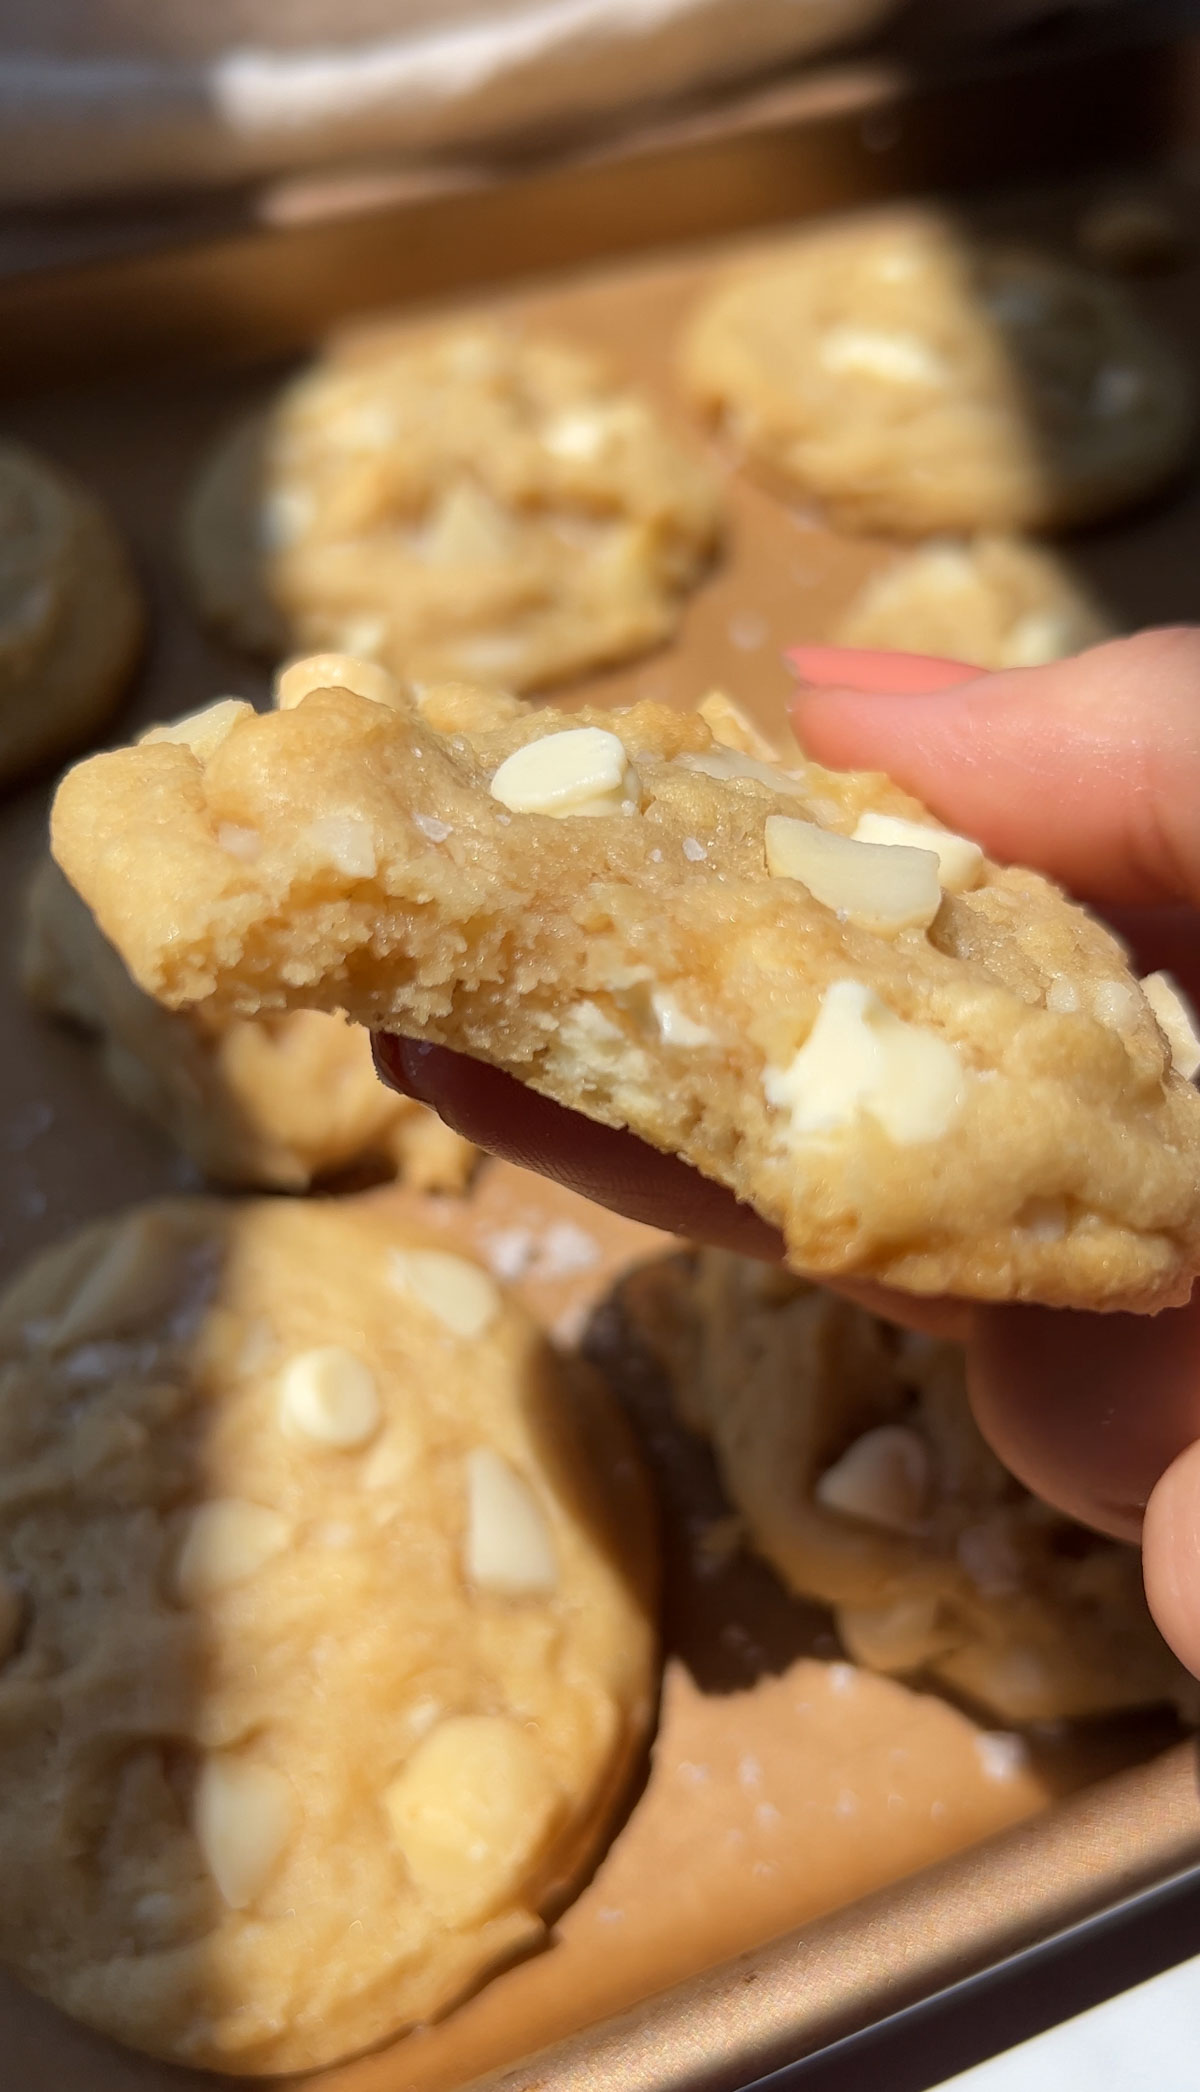 a white chocolate macadamia cookie with a bite taken into it